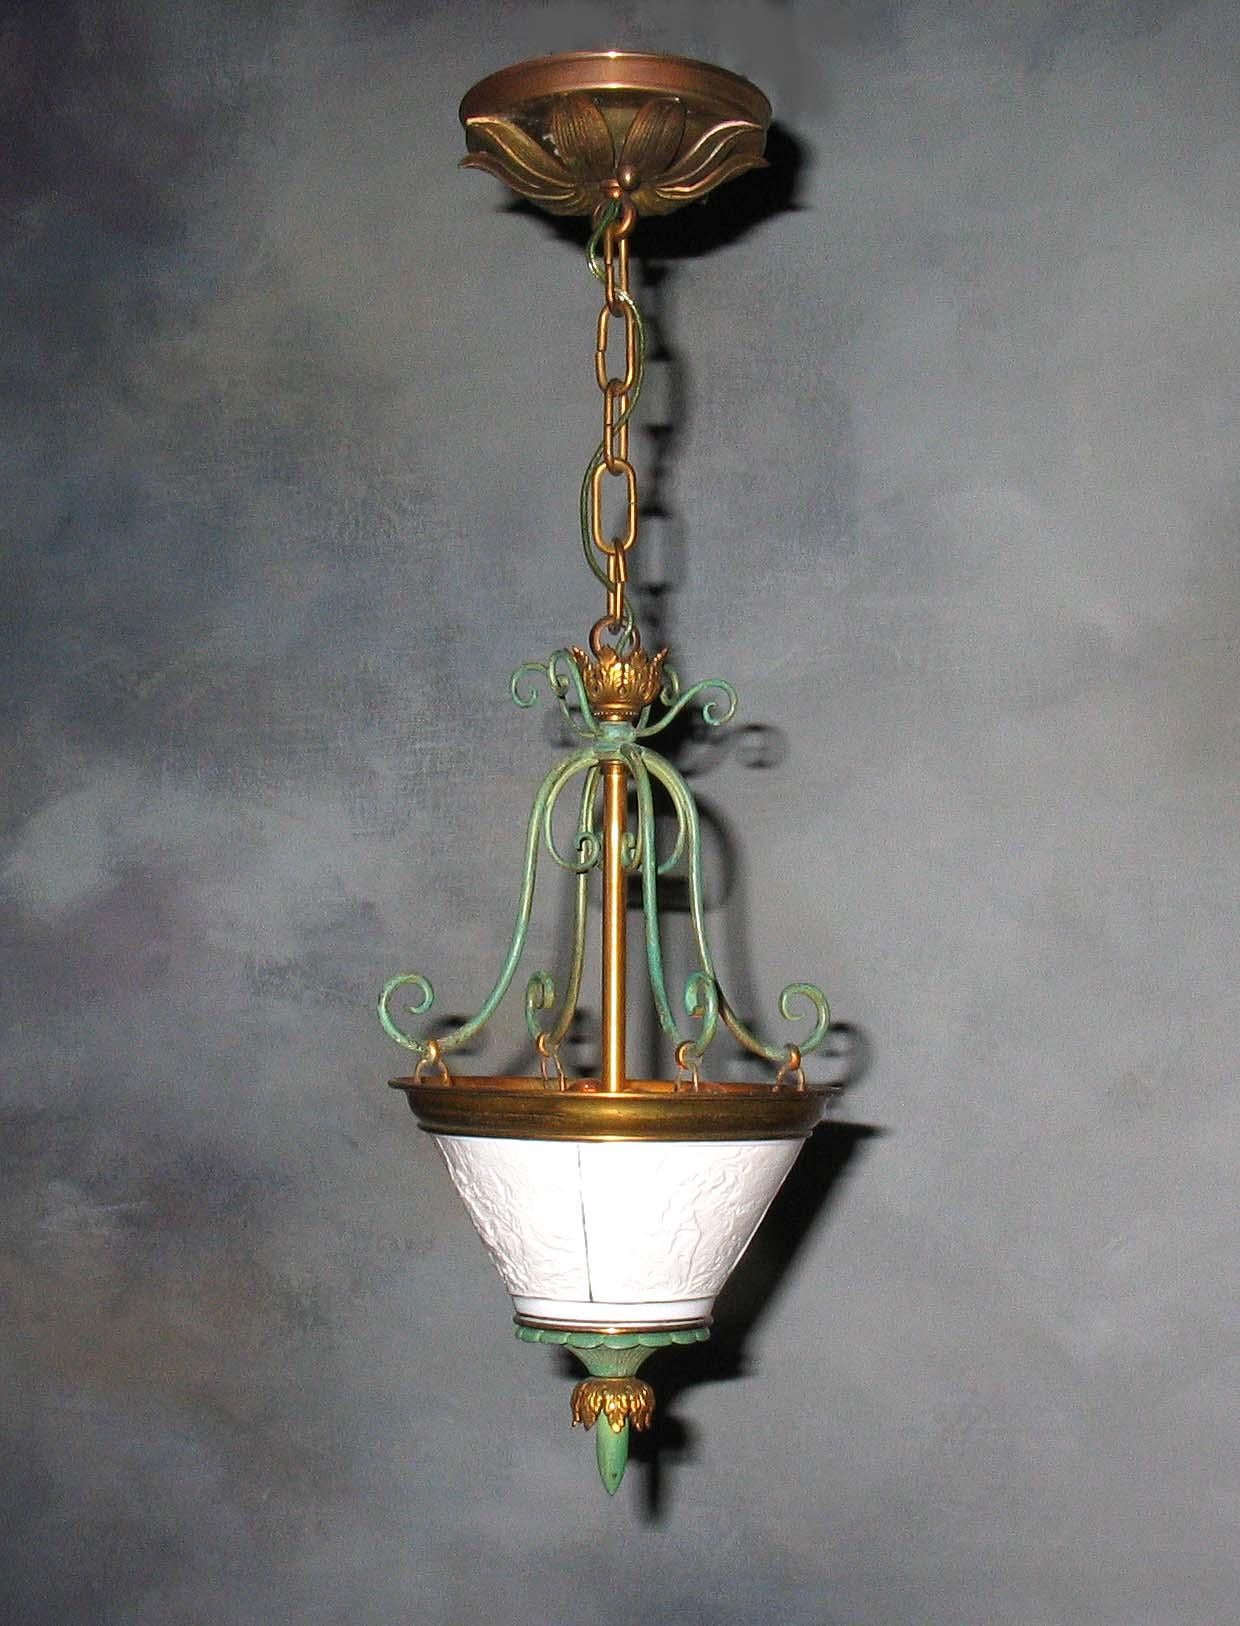 German Fabulous Wrought Brass and Lithophane Ceiling Light, Early 20th Century